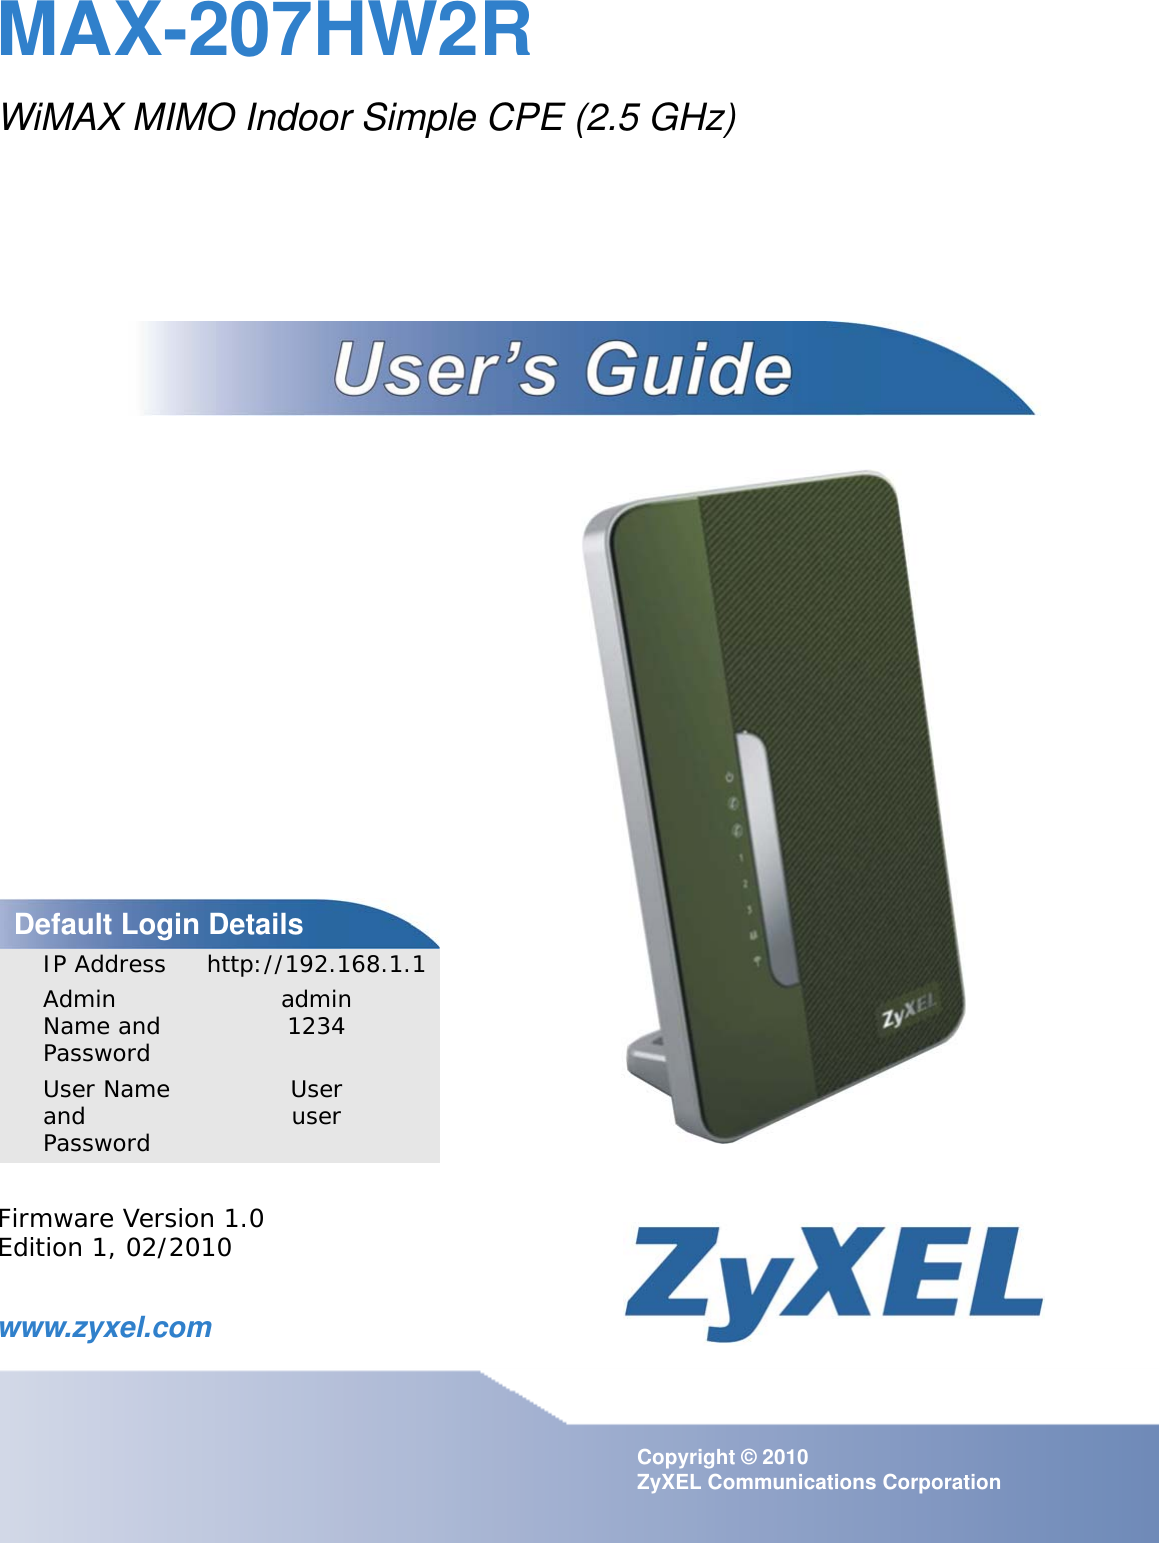 www.zyxel.comwww.zyxel.comMAX-207HW2RWiMAX MIMO Indoor Simple CPE (2.5 GHz)Copyright © 2010 ZyXEL Communications CorporationFirmware Version 1.0Edition 1, 02/2010Default Login DetailsIP Address http://192.168.1.1Admin Name and Passwordadmin1234User Name and PasswordUseruser